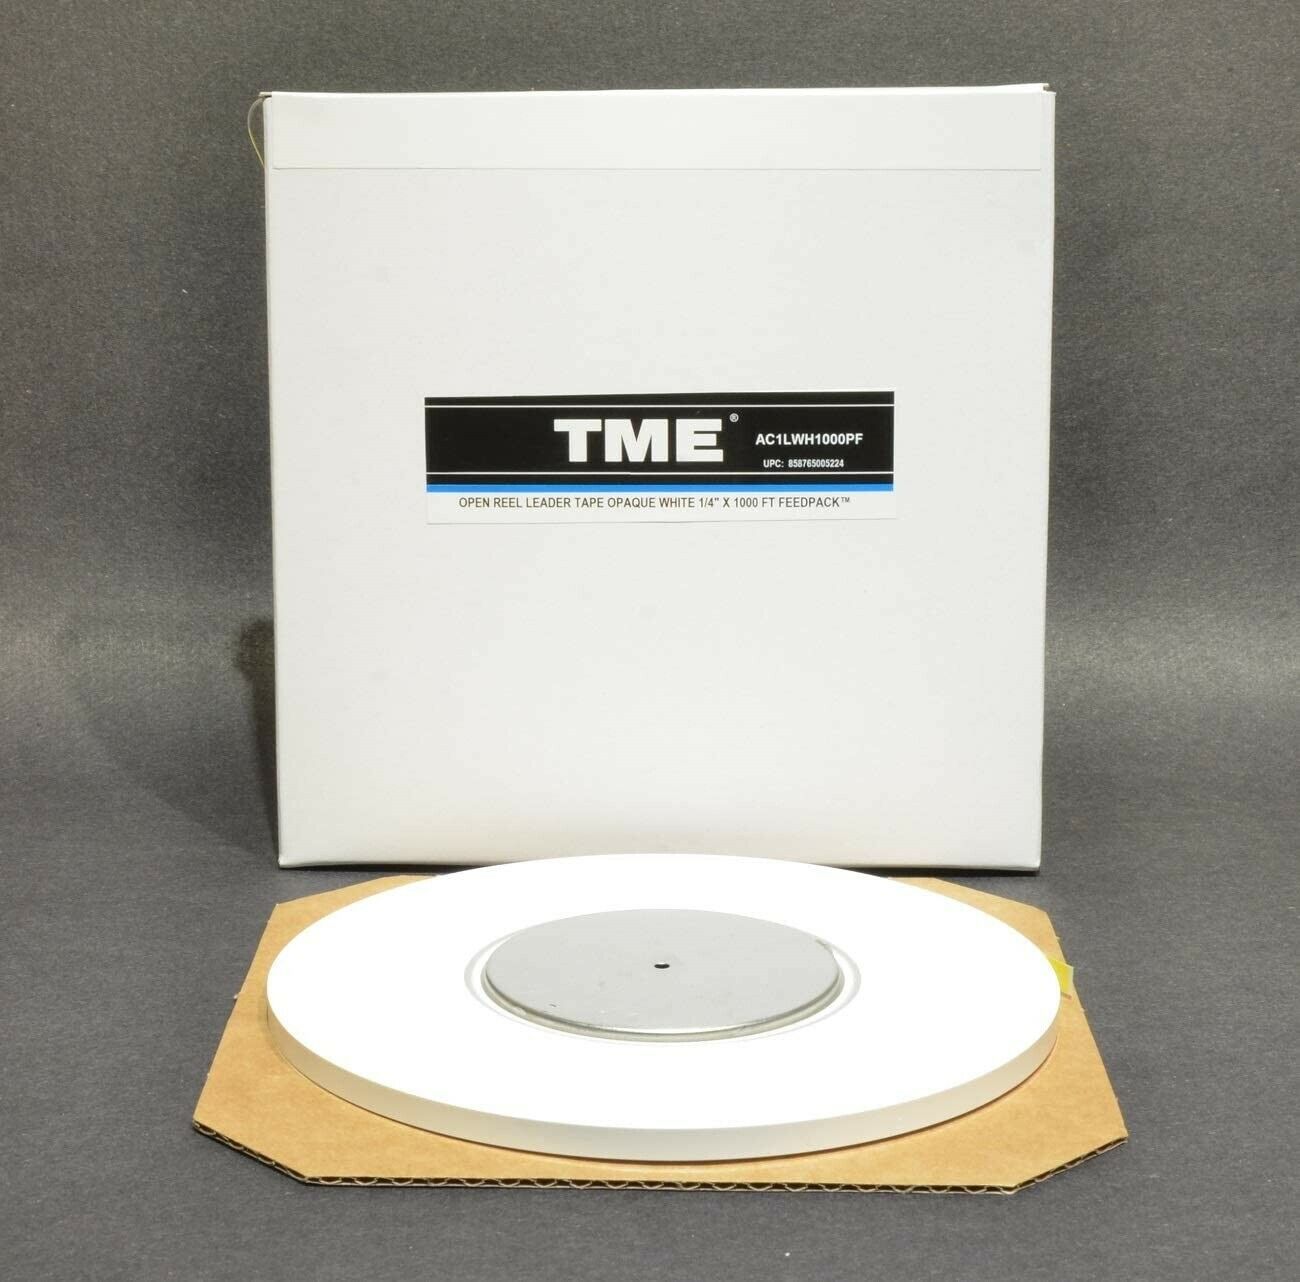 Open Reel Audio Leader Tape Solid White 1/4" X 1000 Ft or 500 Ft Feedpack Pancake by TME